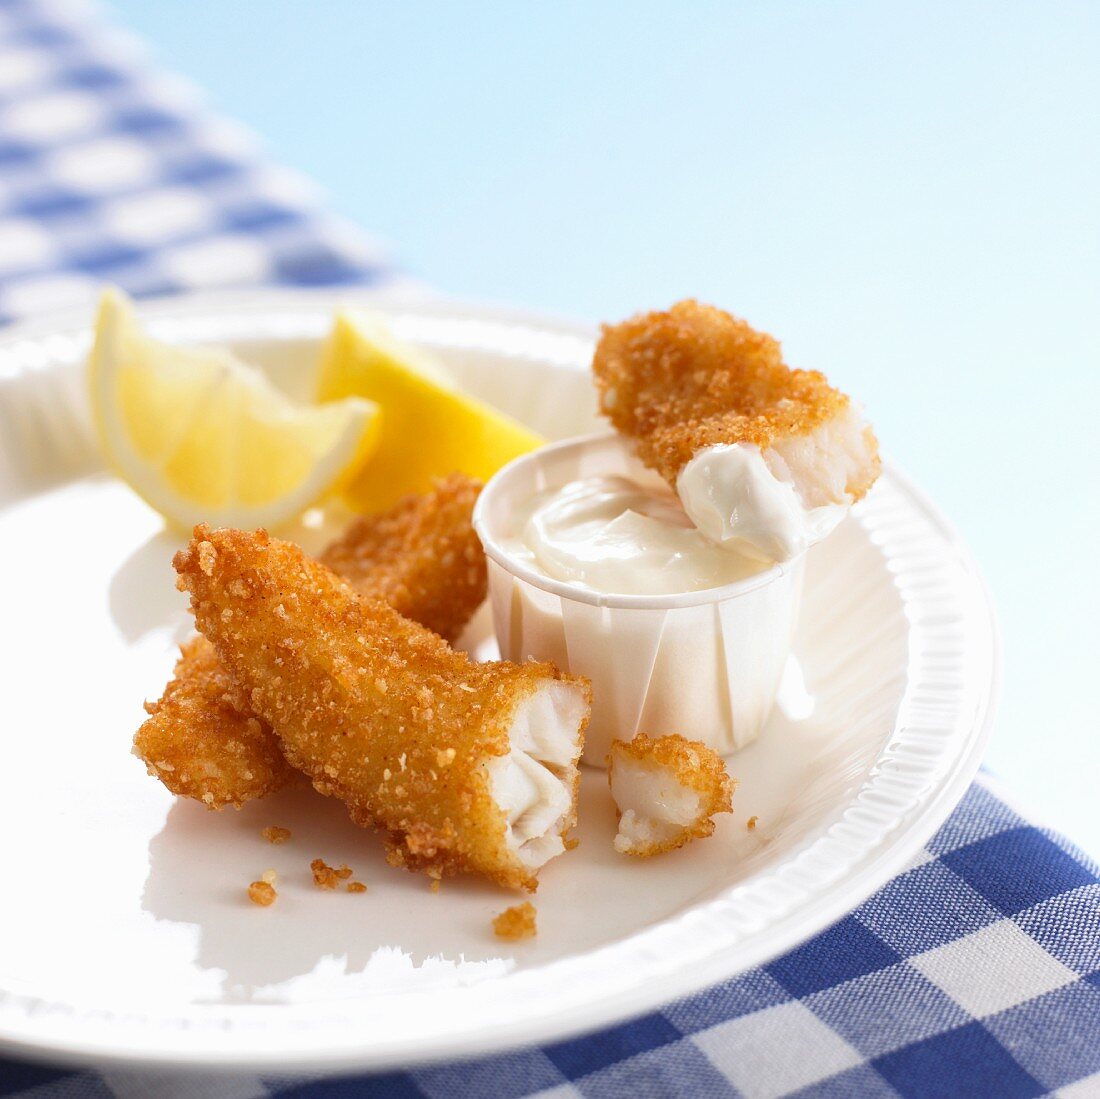 Breaded fish fillets with mayonnaise